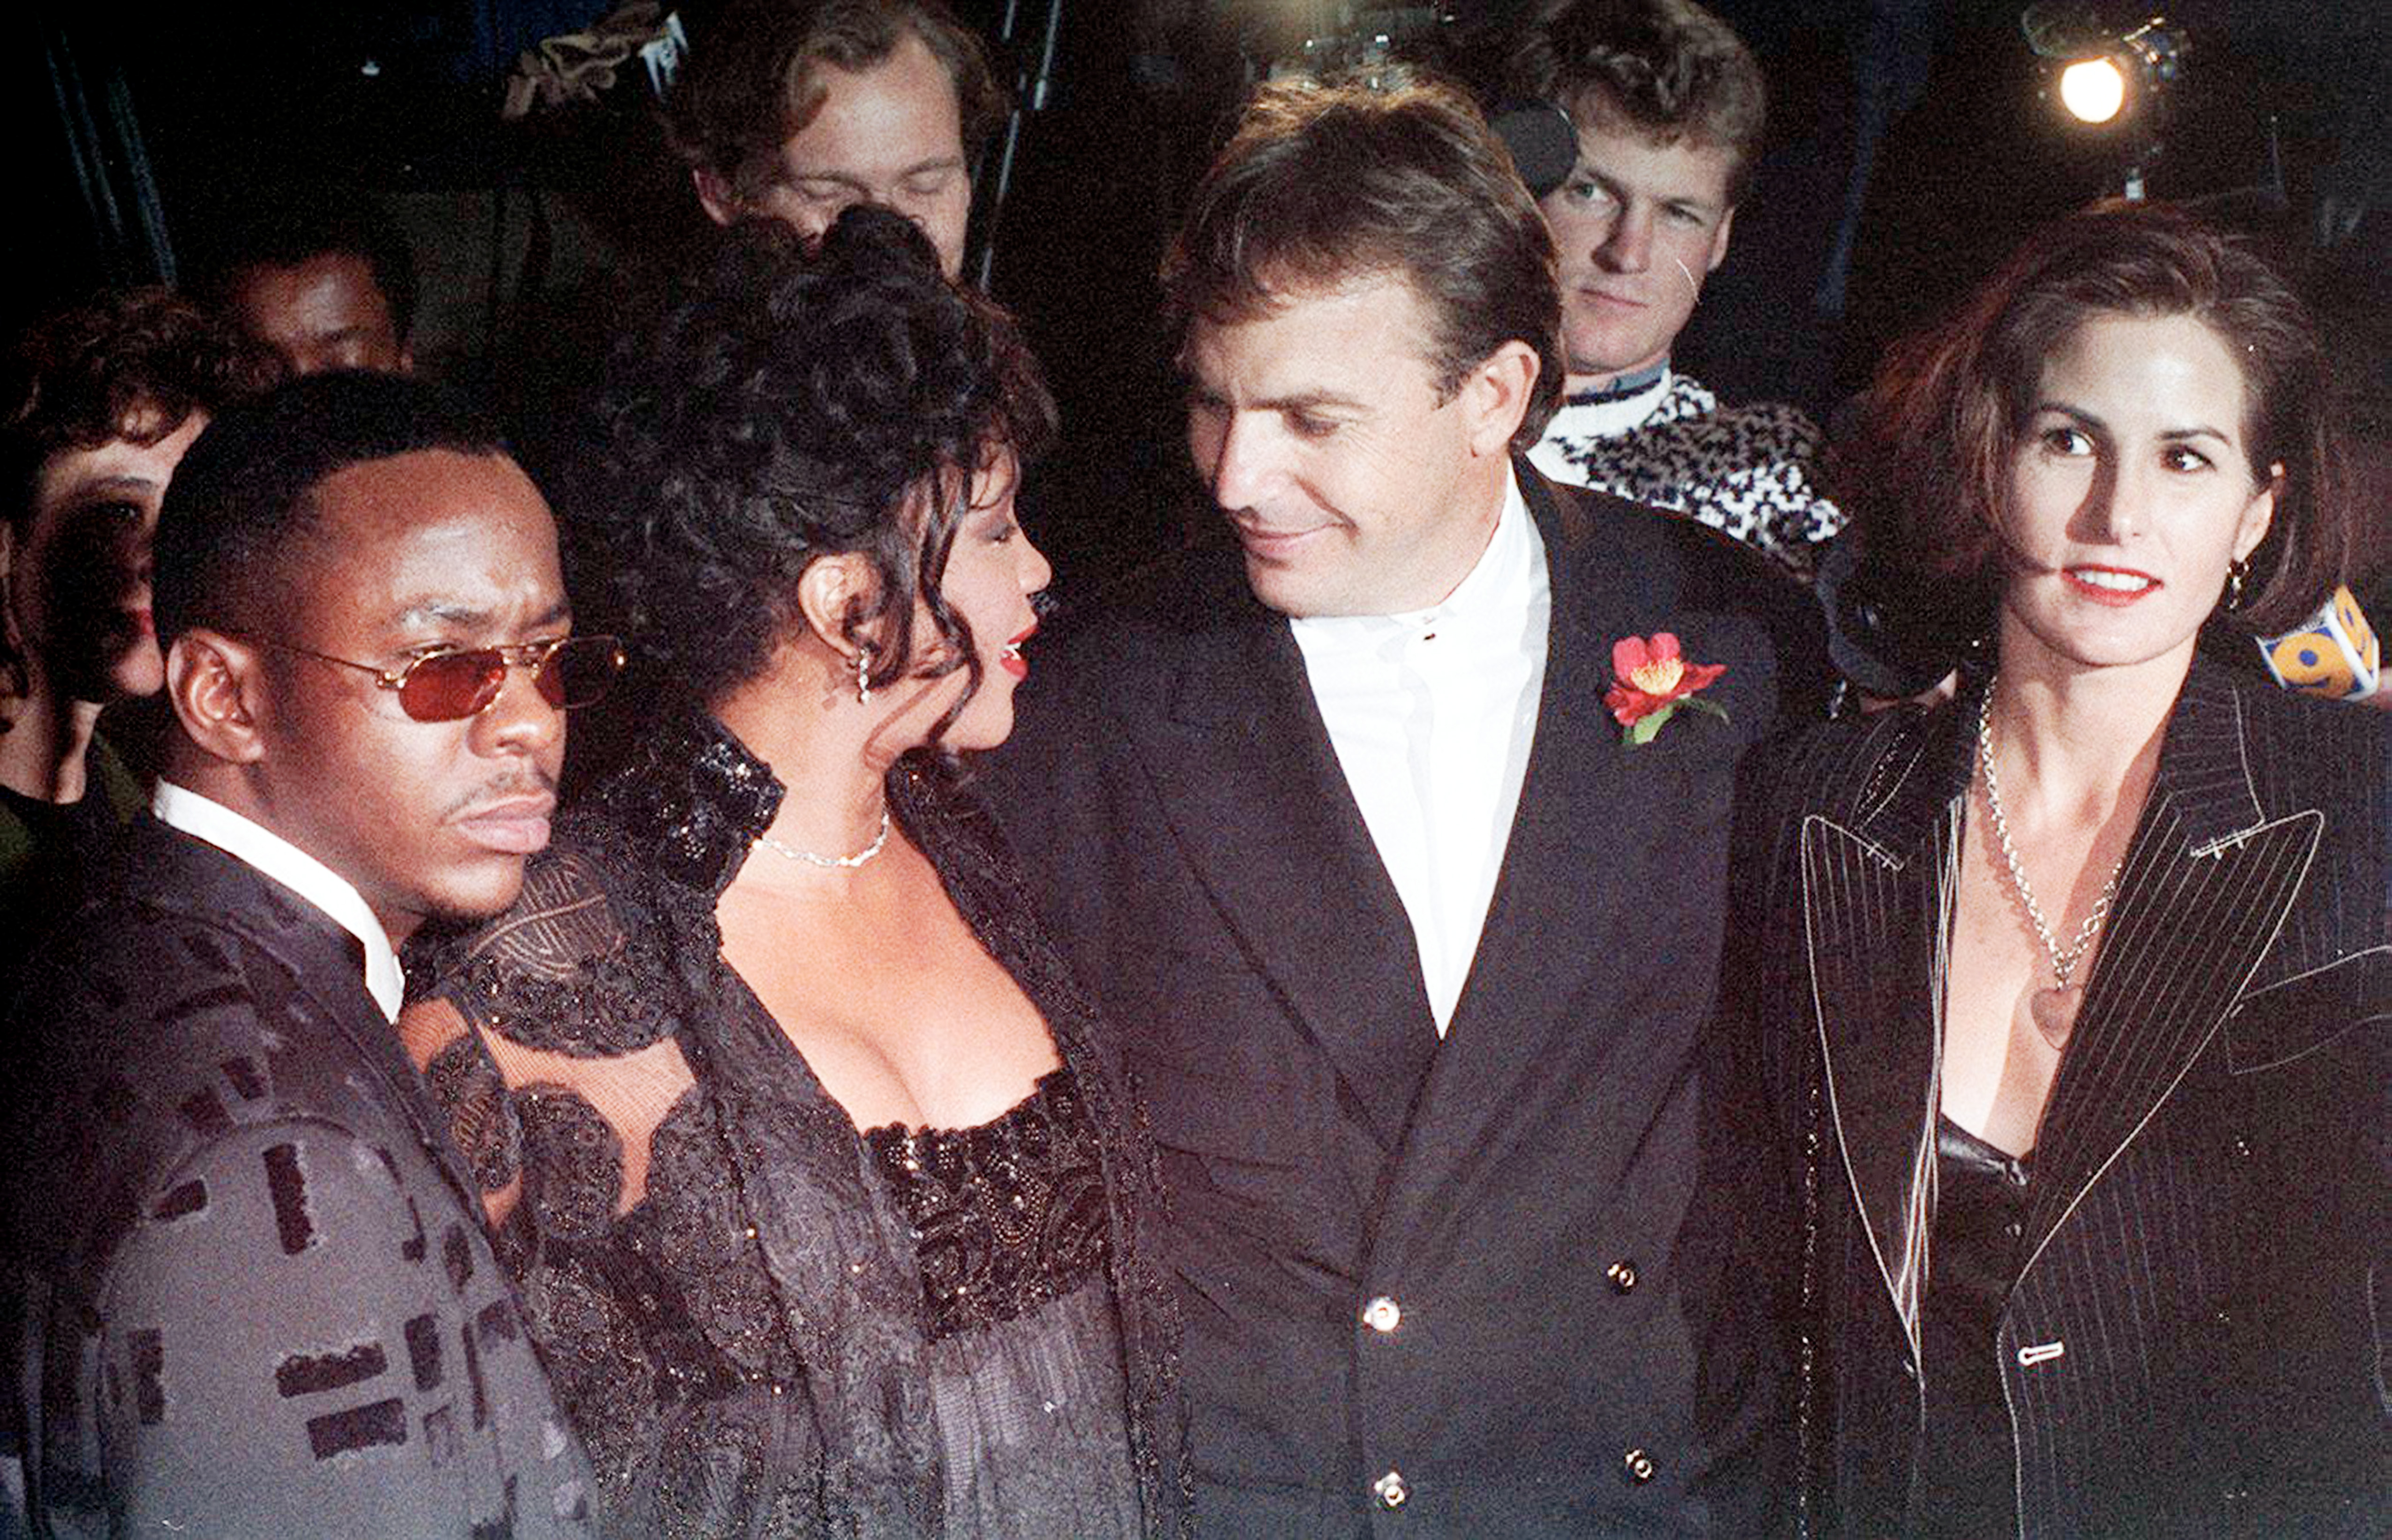 Bobby Brown, Whitney Houston, Kevin Costner, and Cindy Silva at the premiere of "The Bodyguard" in Hollywood, 1992. | Source: Getty Images